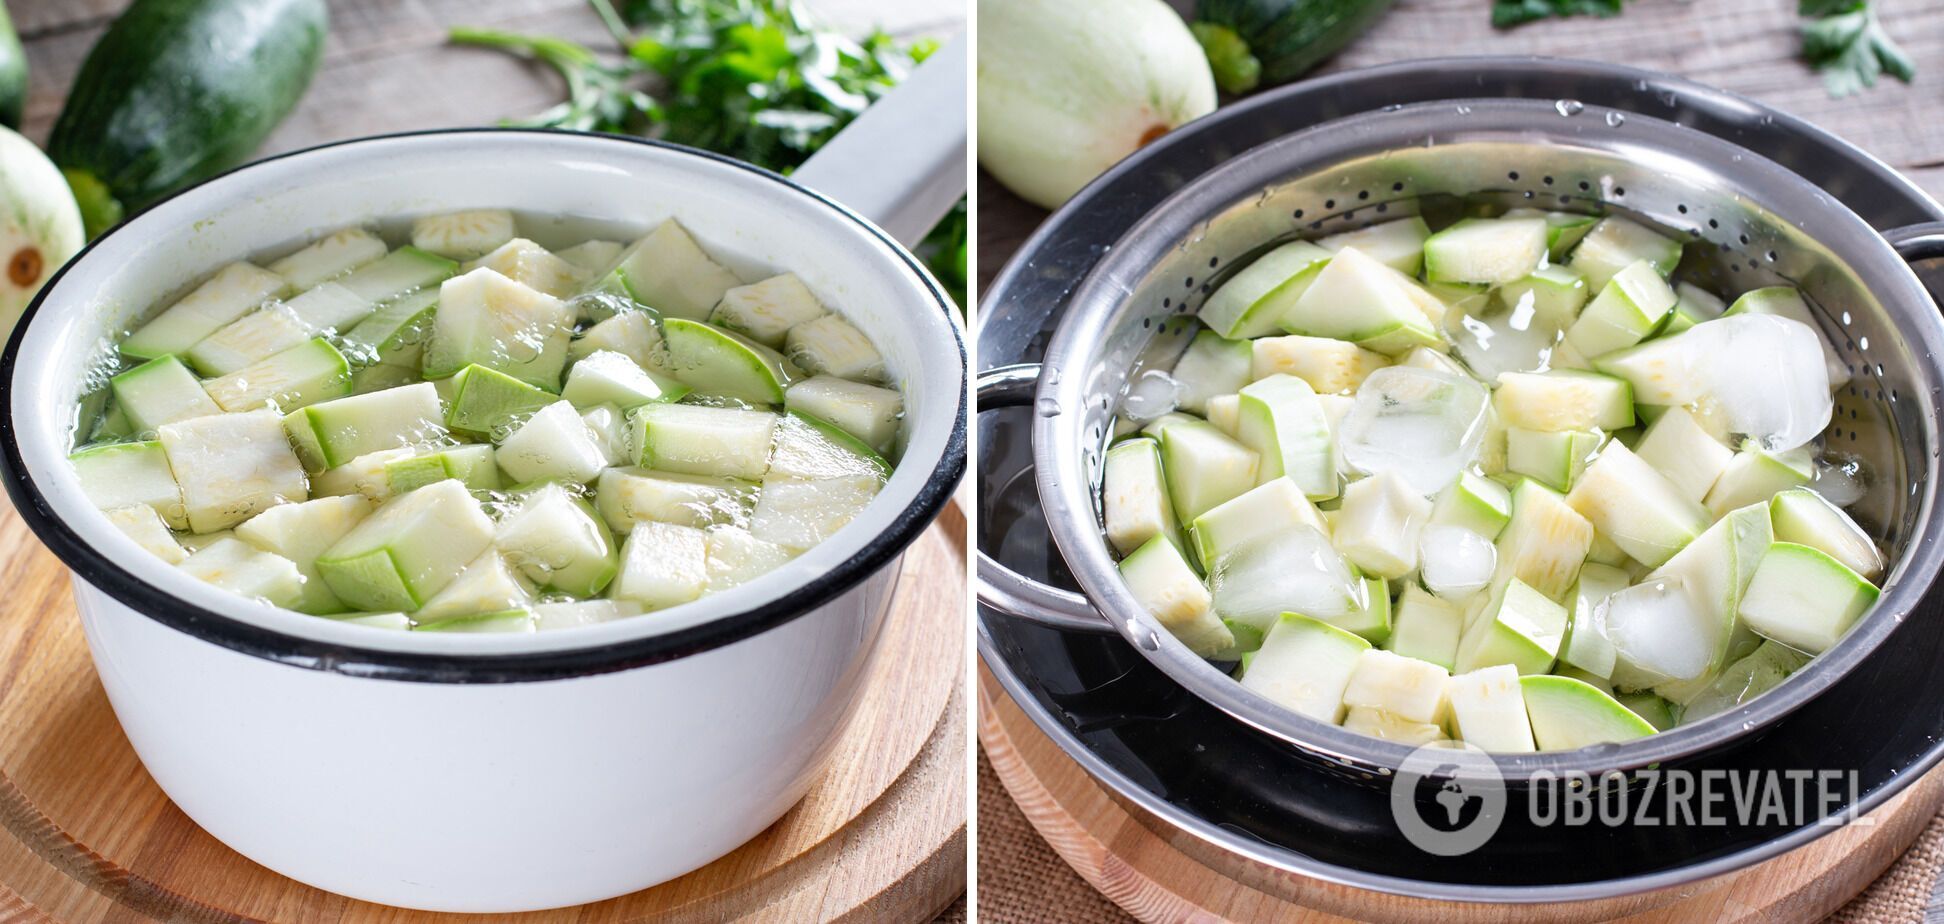 How to properly prepare cubed zucchini for freezing